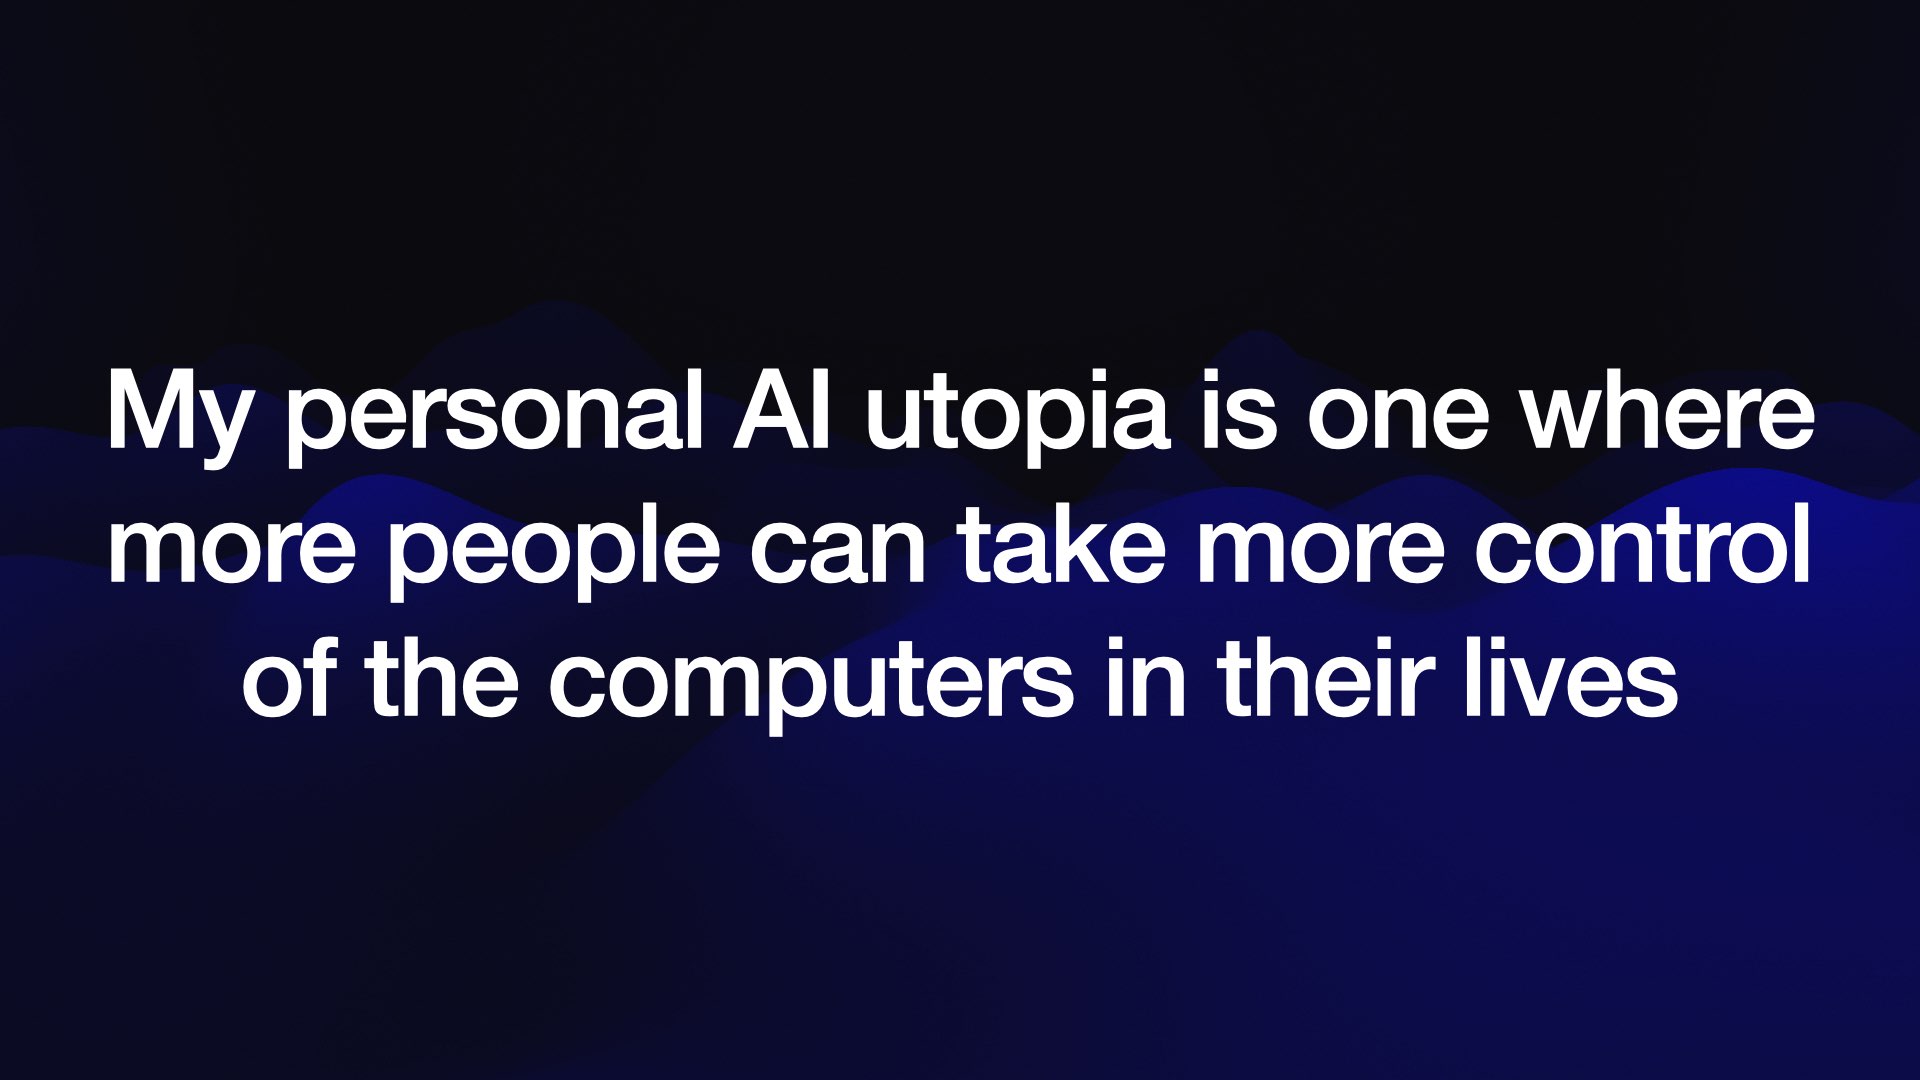 My personal AI utopia is one where more people can take more control of the computers in their lives 